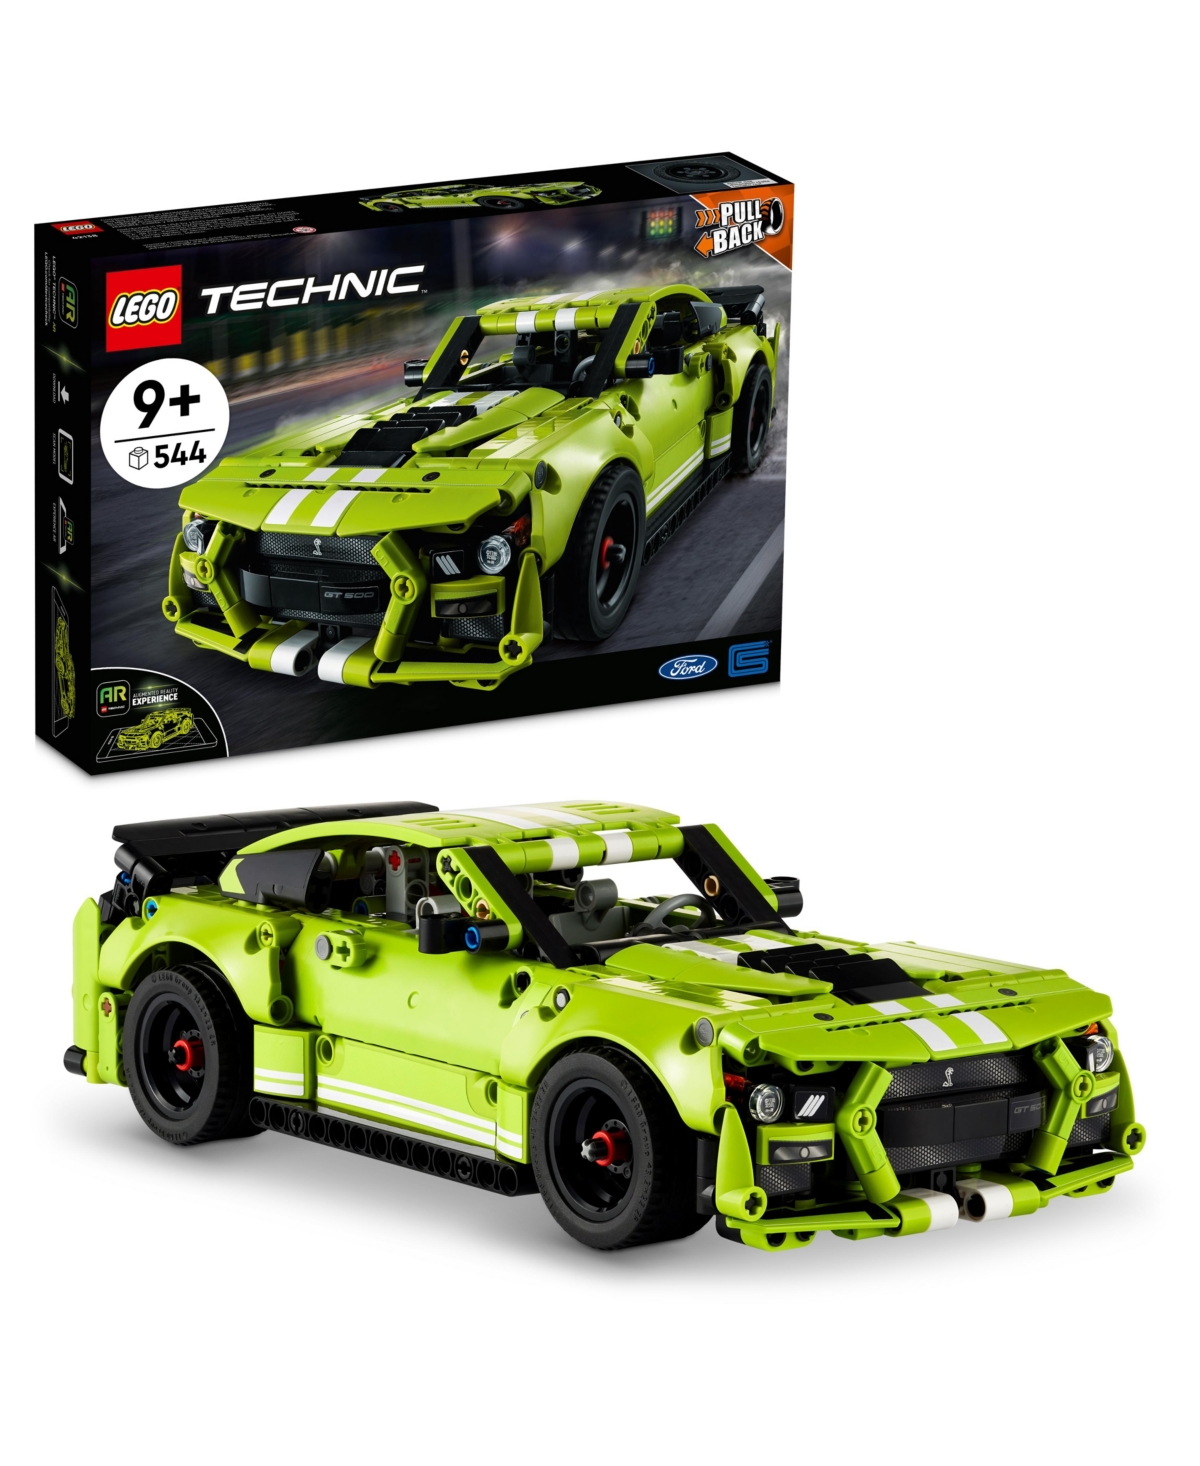 Lego Kids' Technic 42138 Ford Mustang Shelbyâ Gt500 Toy Sports Car Building Set In Multiple